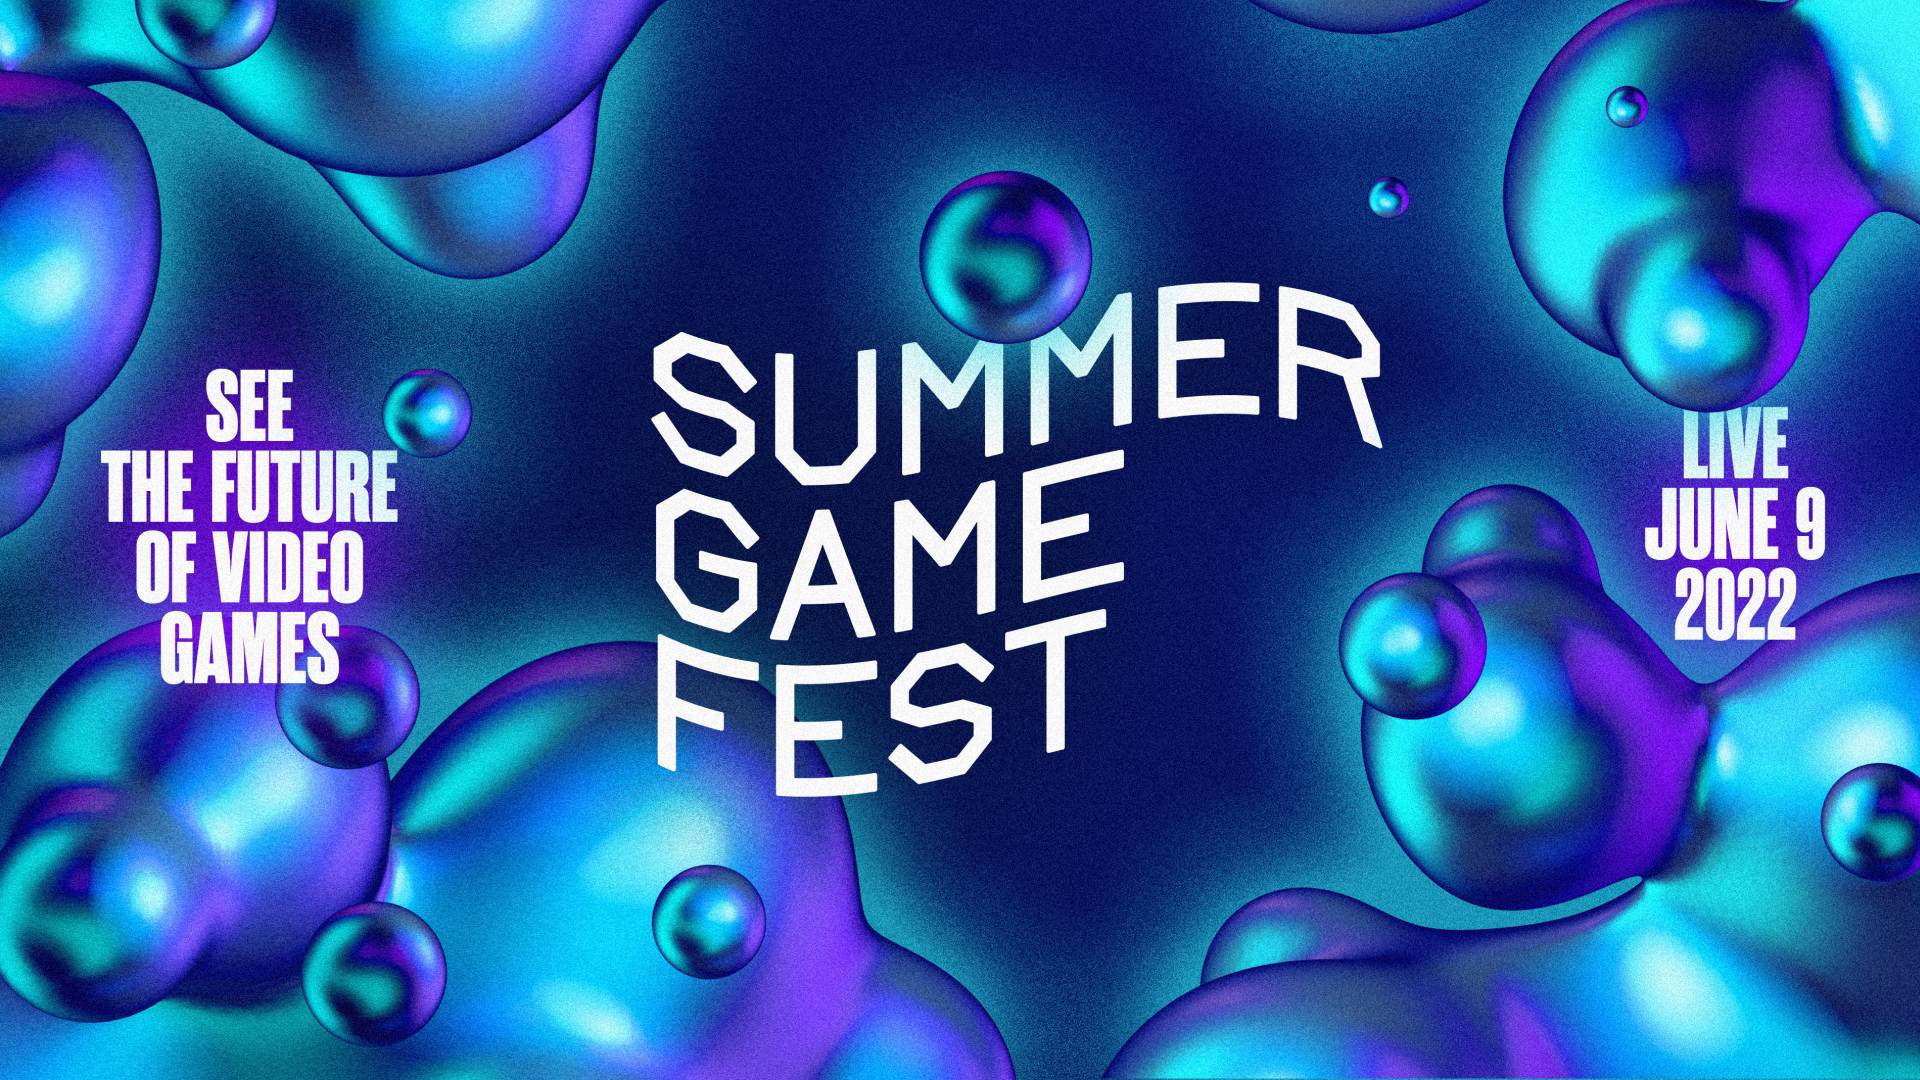 Summer Game Fest Live! + Day of the Devs: SGF Edition Date Revealed